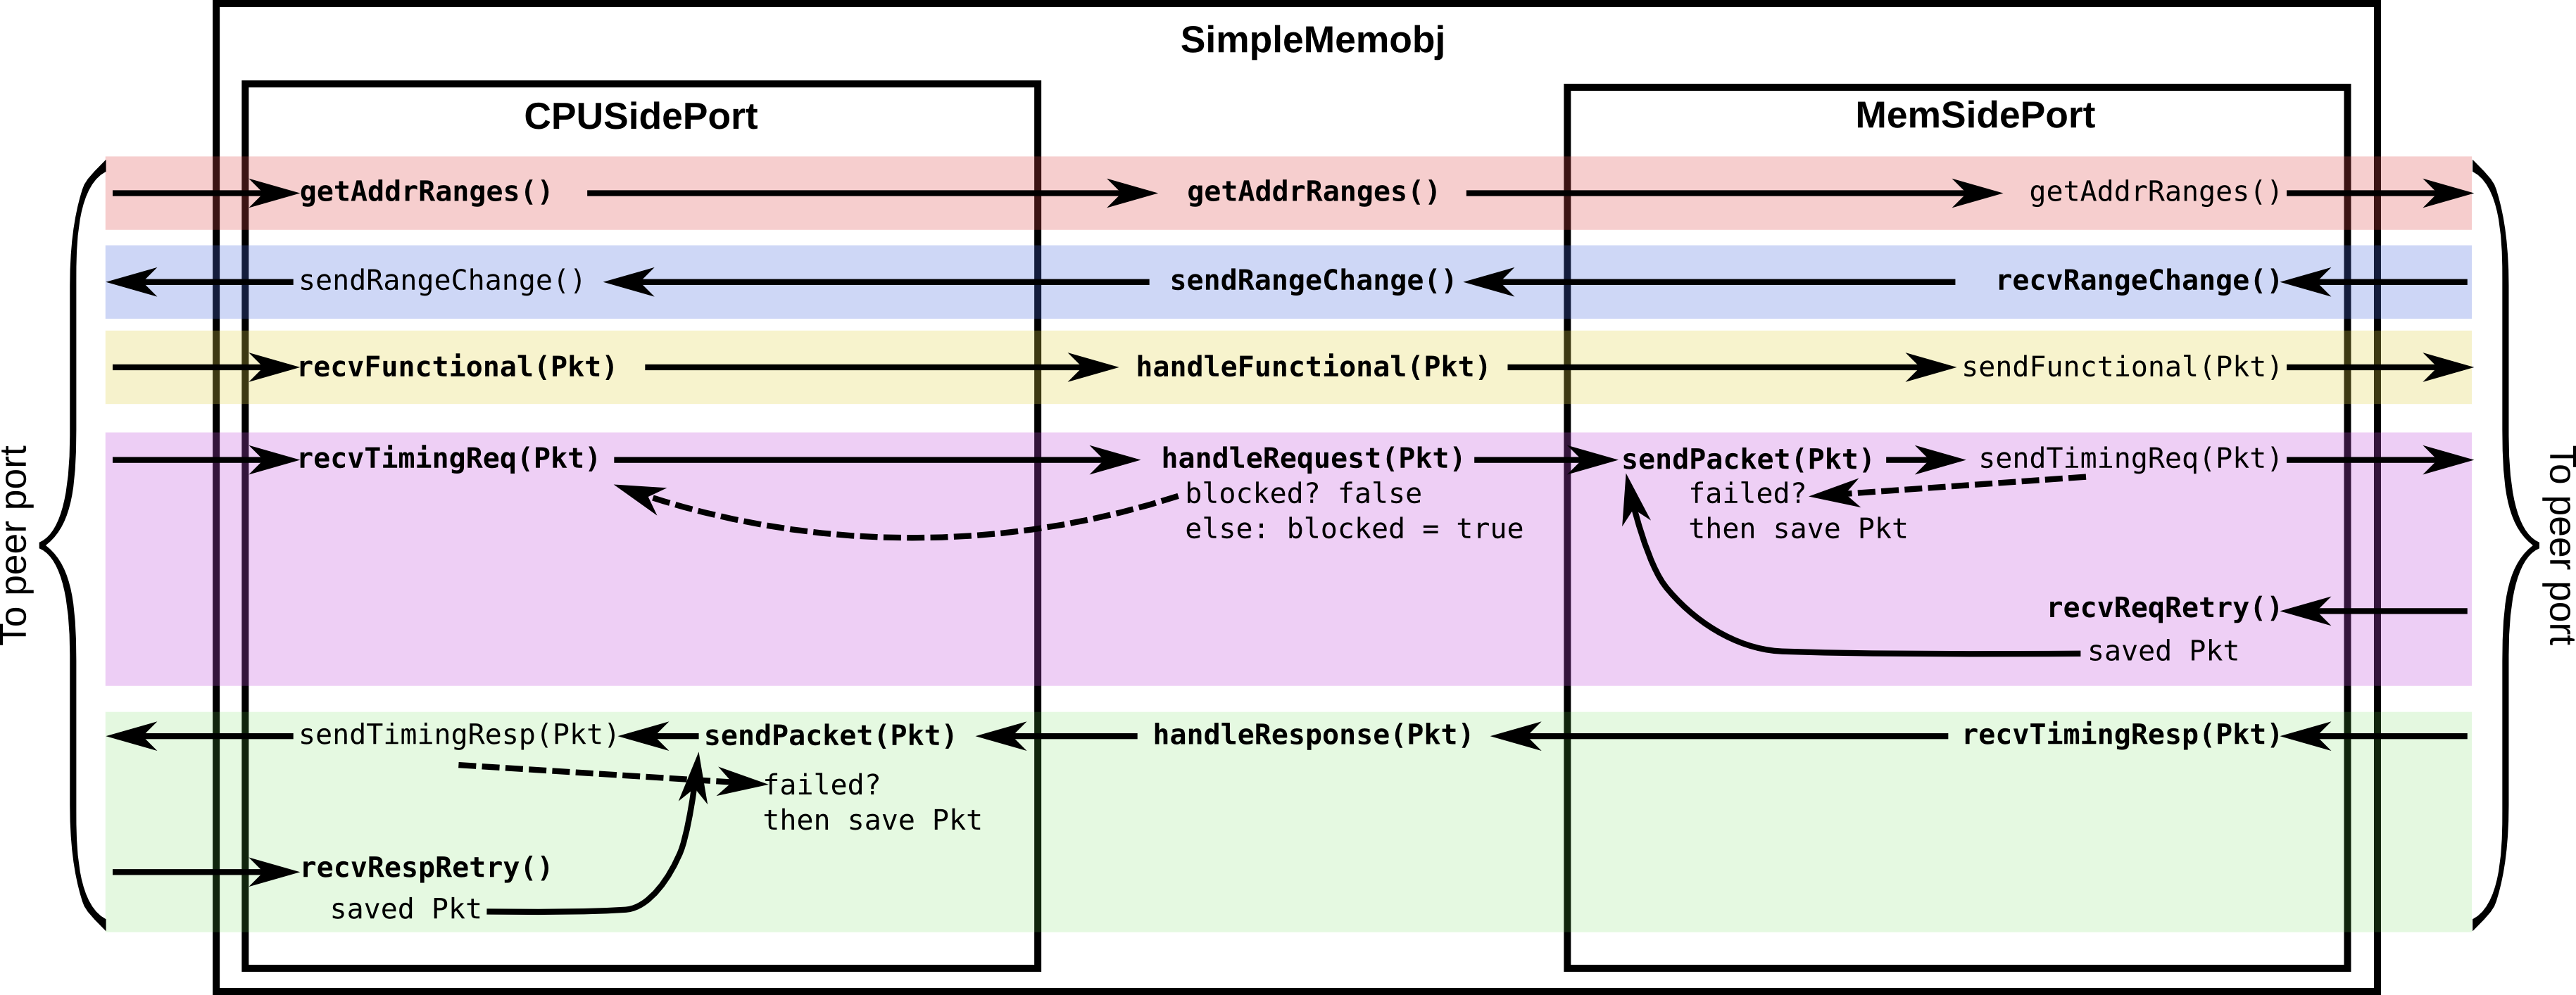 Interaction between SimpleMemobj and its ports